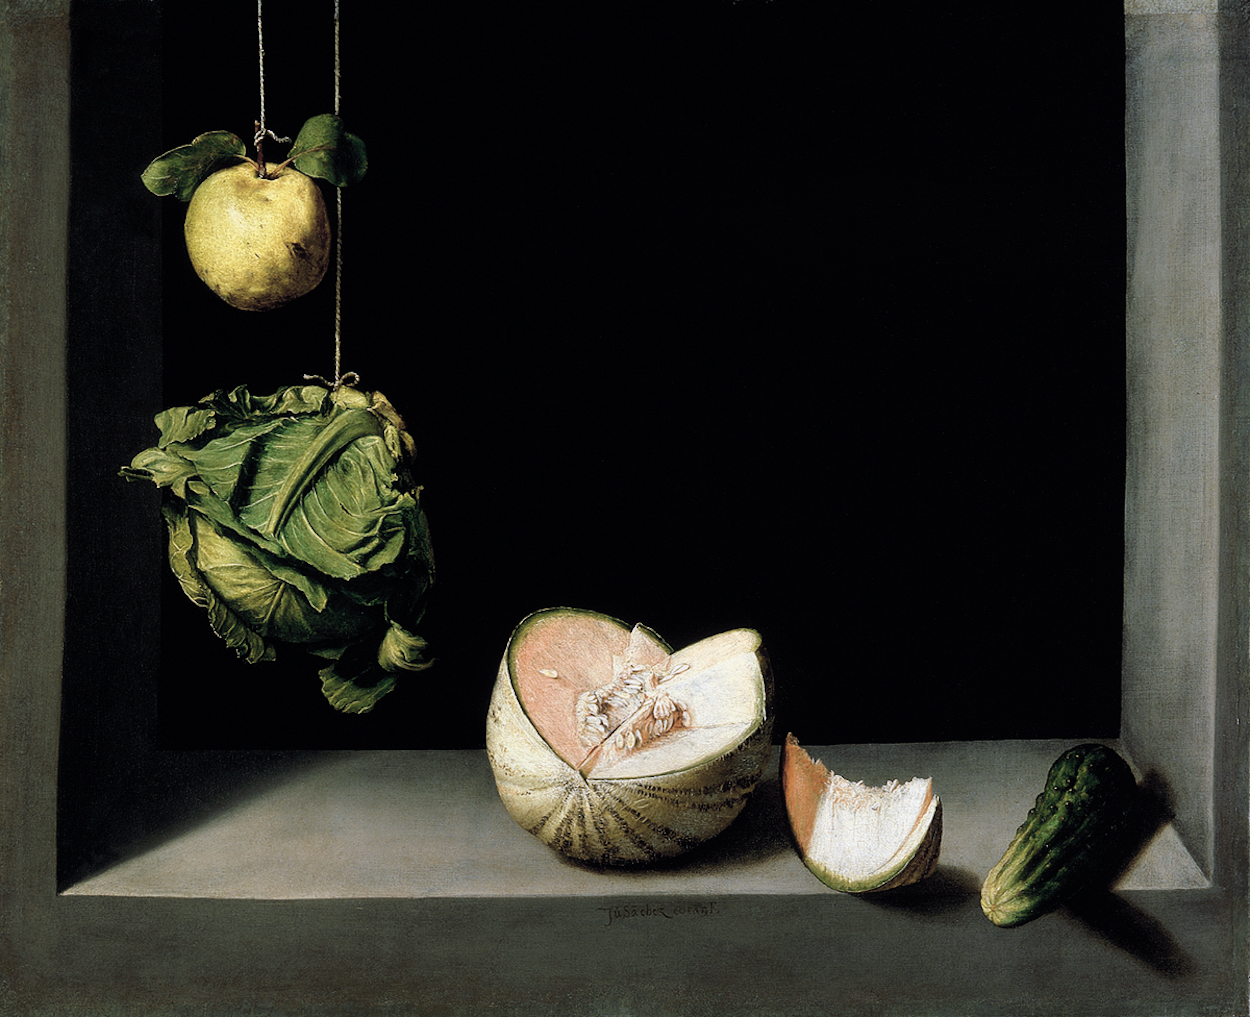 Still Life with Quince, Cabbage, Melon, and Cucumber by Juan Sánchez Cotán - ca. 1602 San Diego Museum of Art